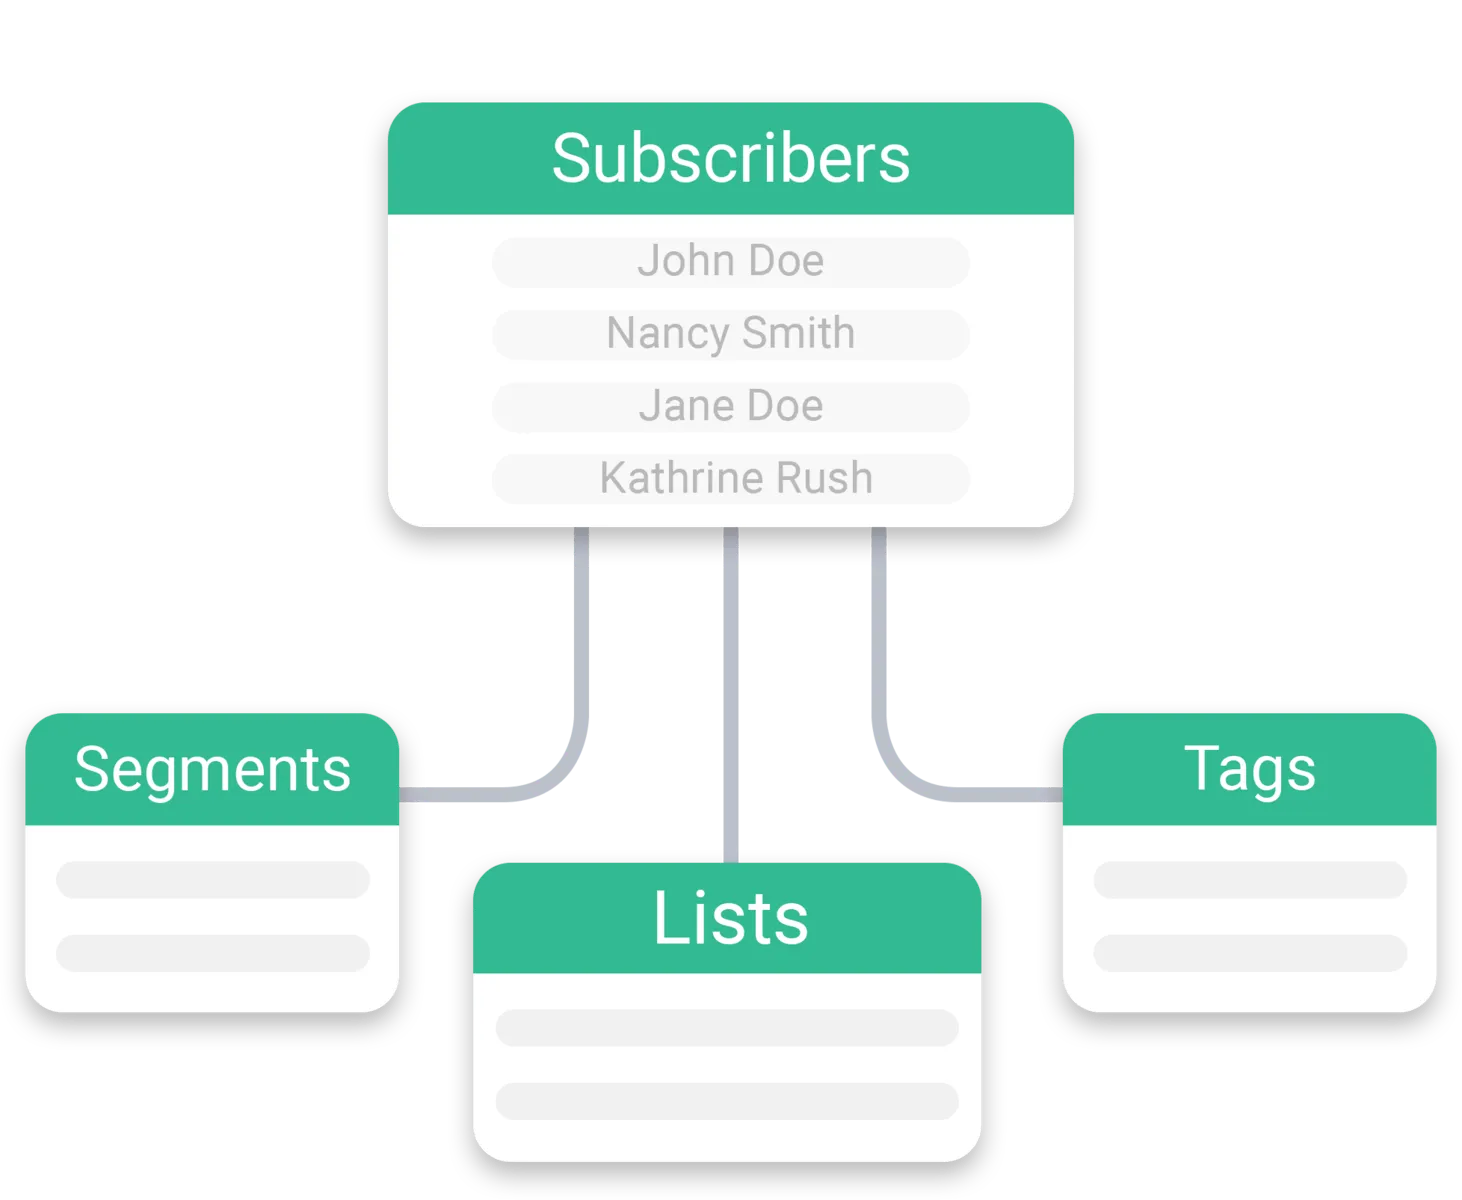 Diagram showing email subscribers organized into segments and tags connected to a central lists category.